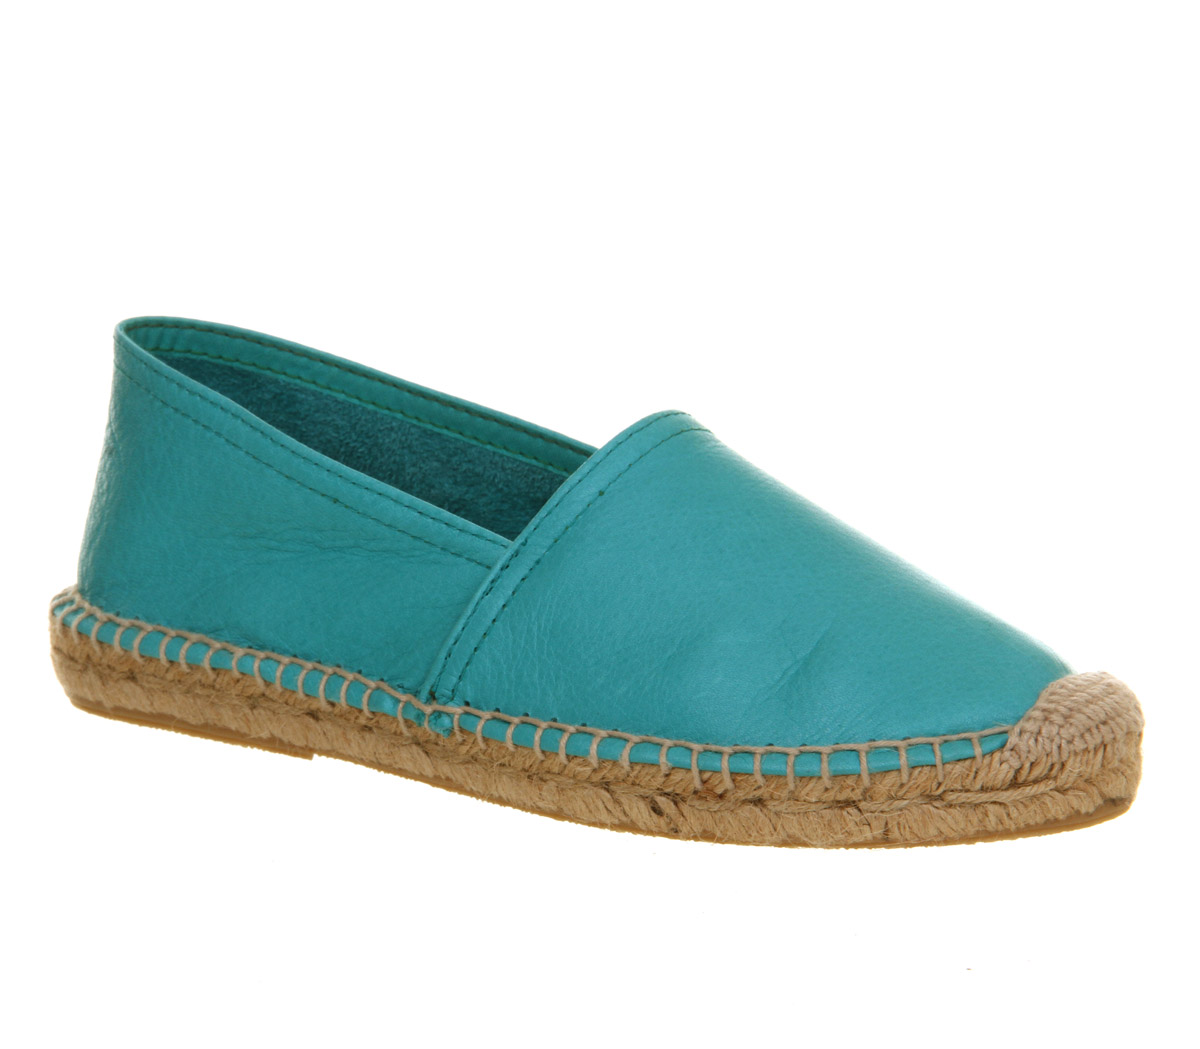 OFFICE Kapture Espadrille Turquoise Leather - Flat Shoes for Women